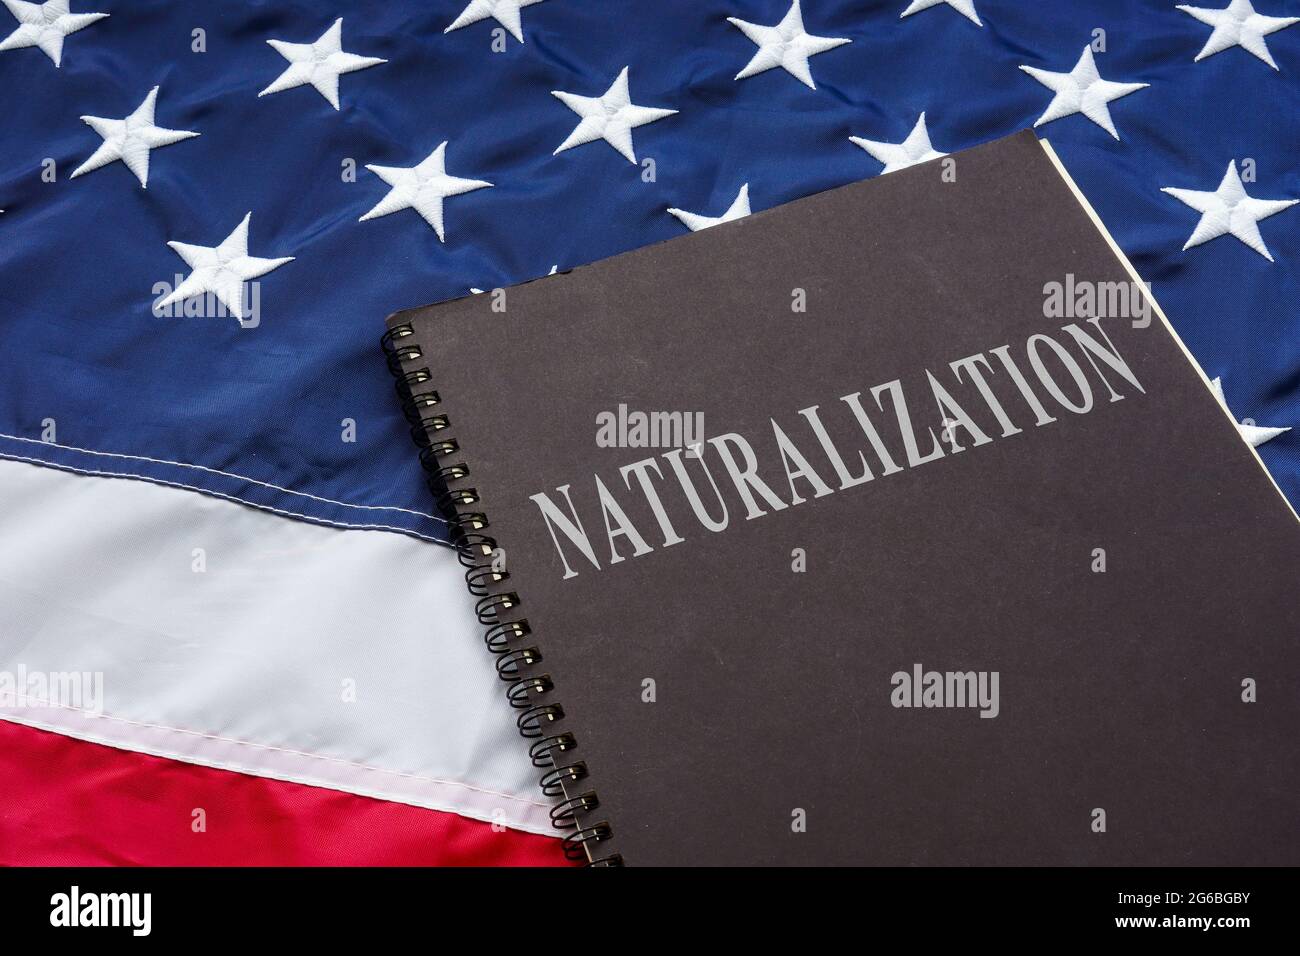 Law about naturalization on the American flag. Stock Photo